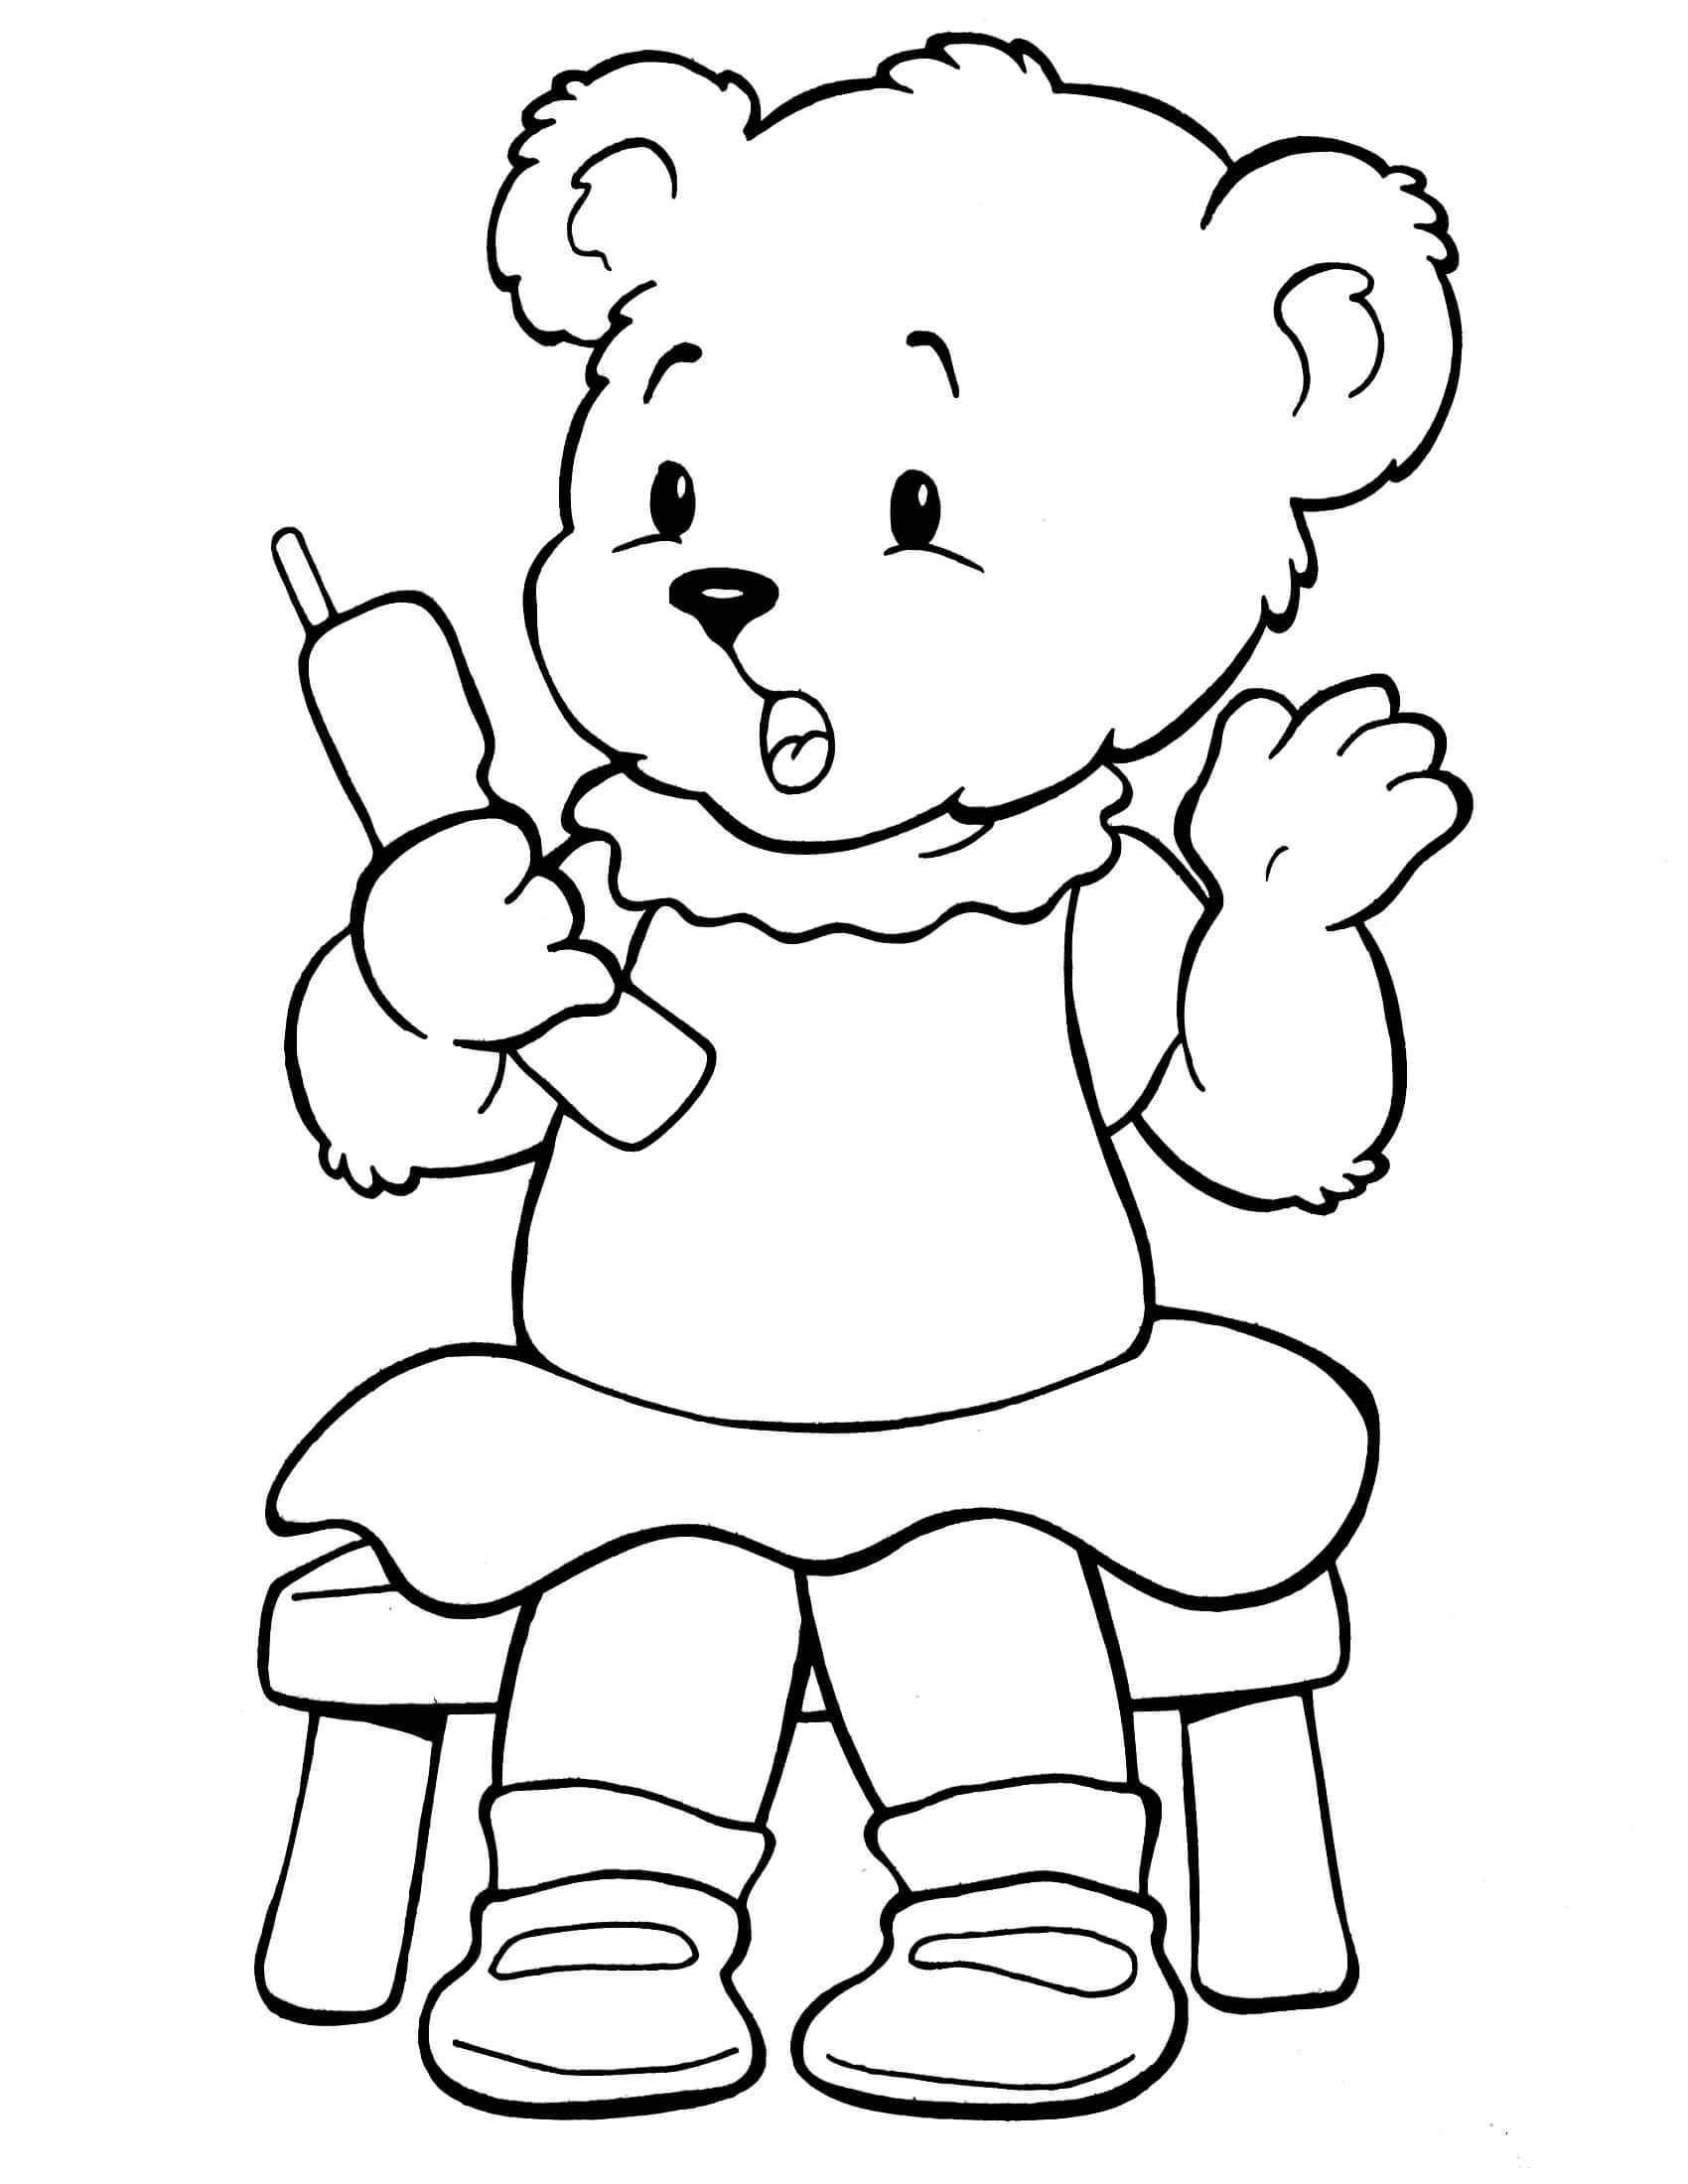 Crayola Coloring Pages For Girls
 Top 25 Crayola Coloring Pages for Girls Best Coloring